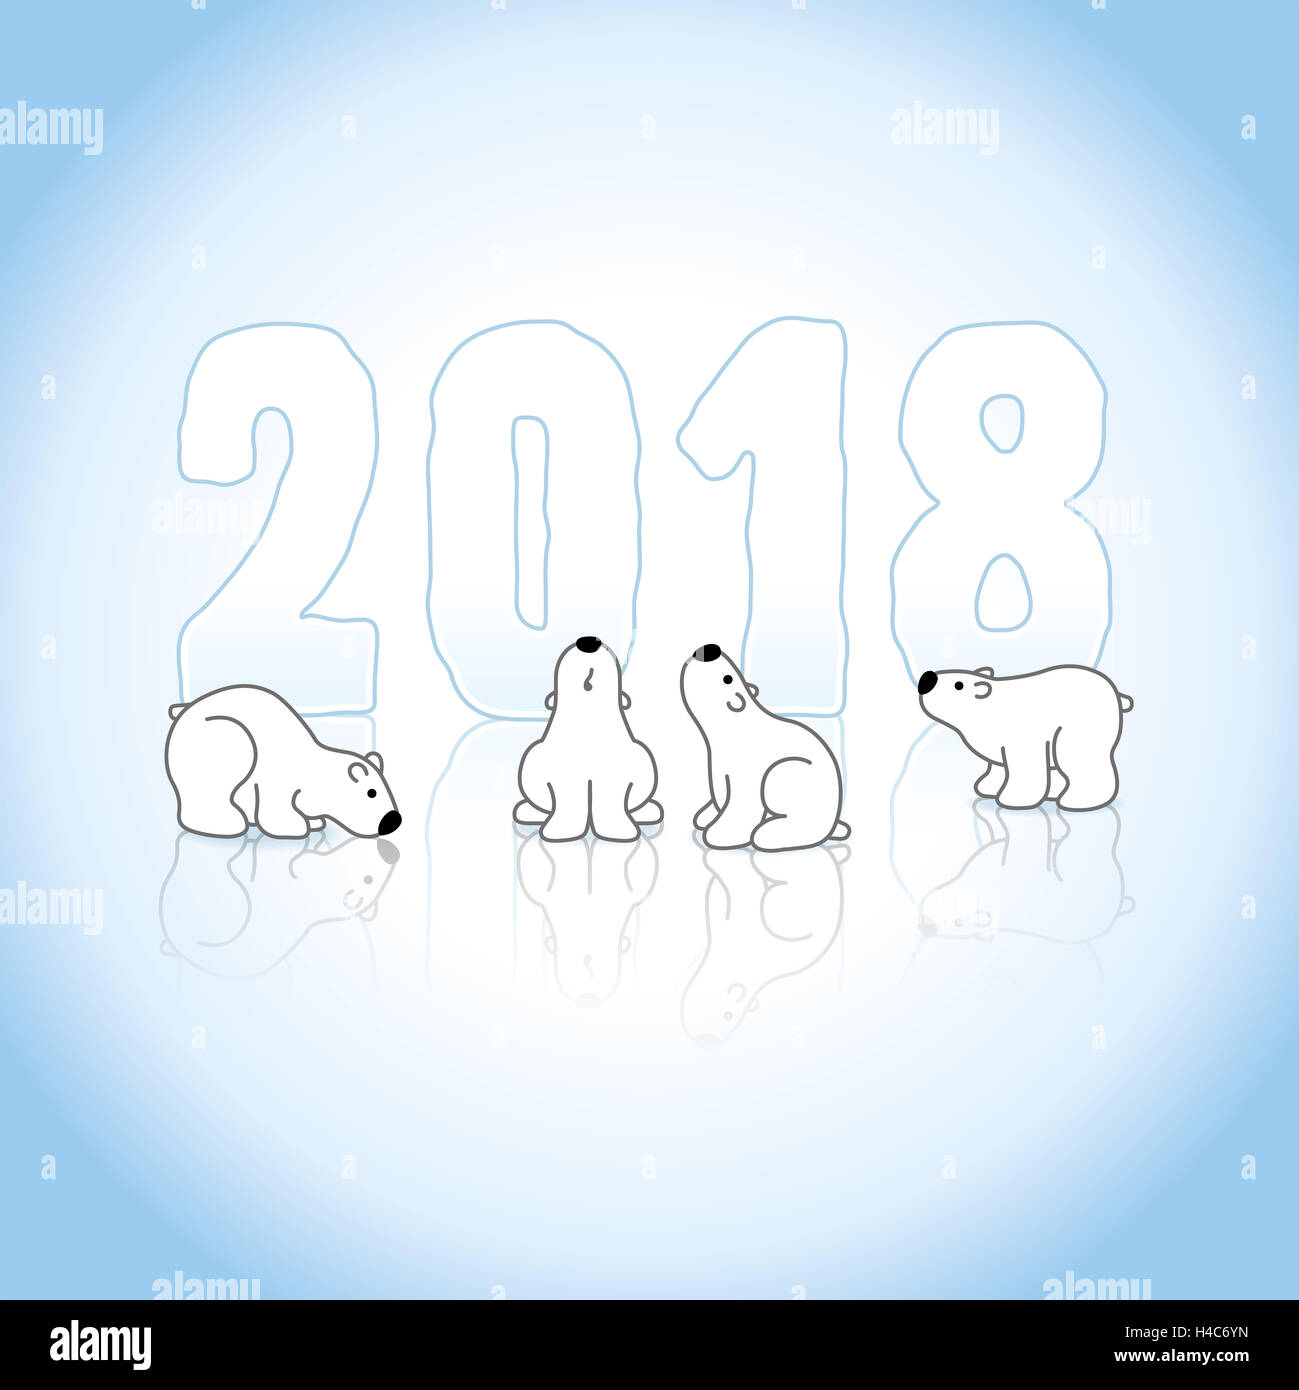 Four Cute Polar Bears and New Year 2018 with Reflections on an Ice Blue Cold Background Stock Photo